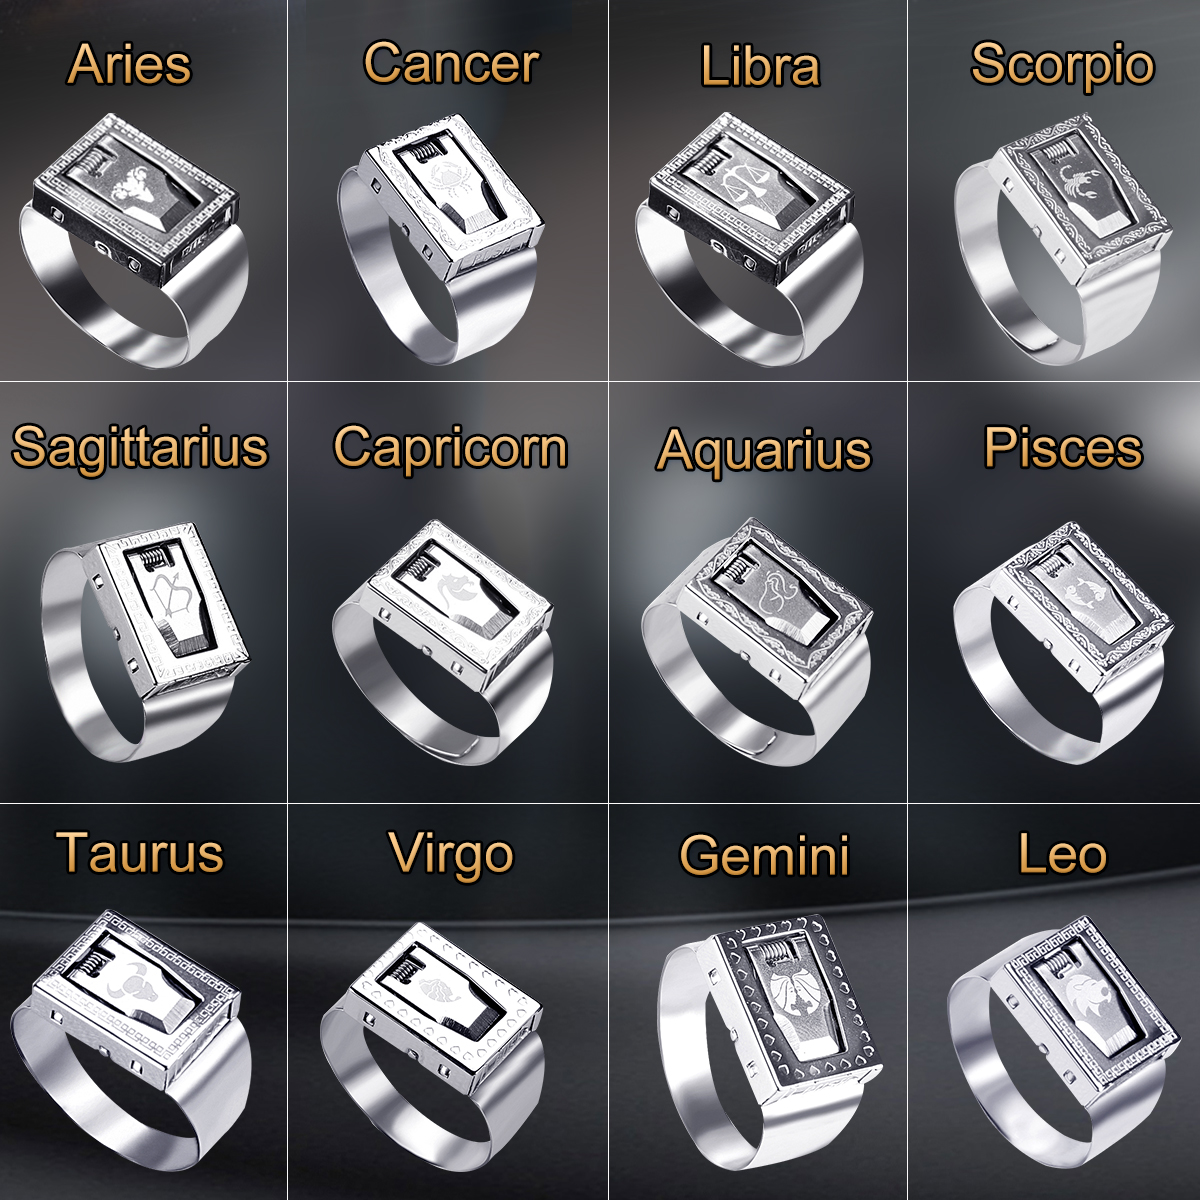 12-Constellation-Self-Protection-Ring-Body-Guard-Ring-Invisibility-Hidden-Ring-Blade-Emergency-Rescu-1423398-2